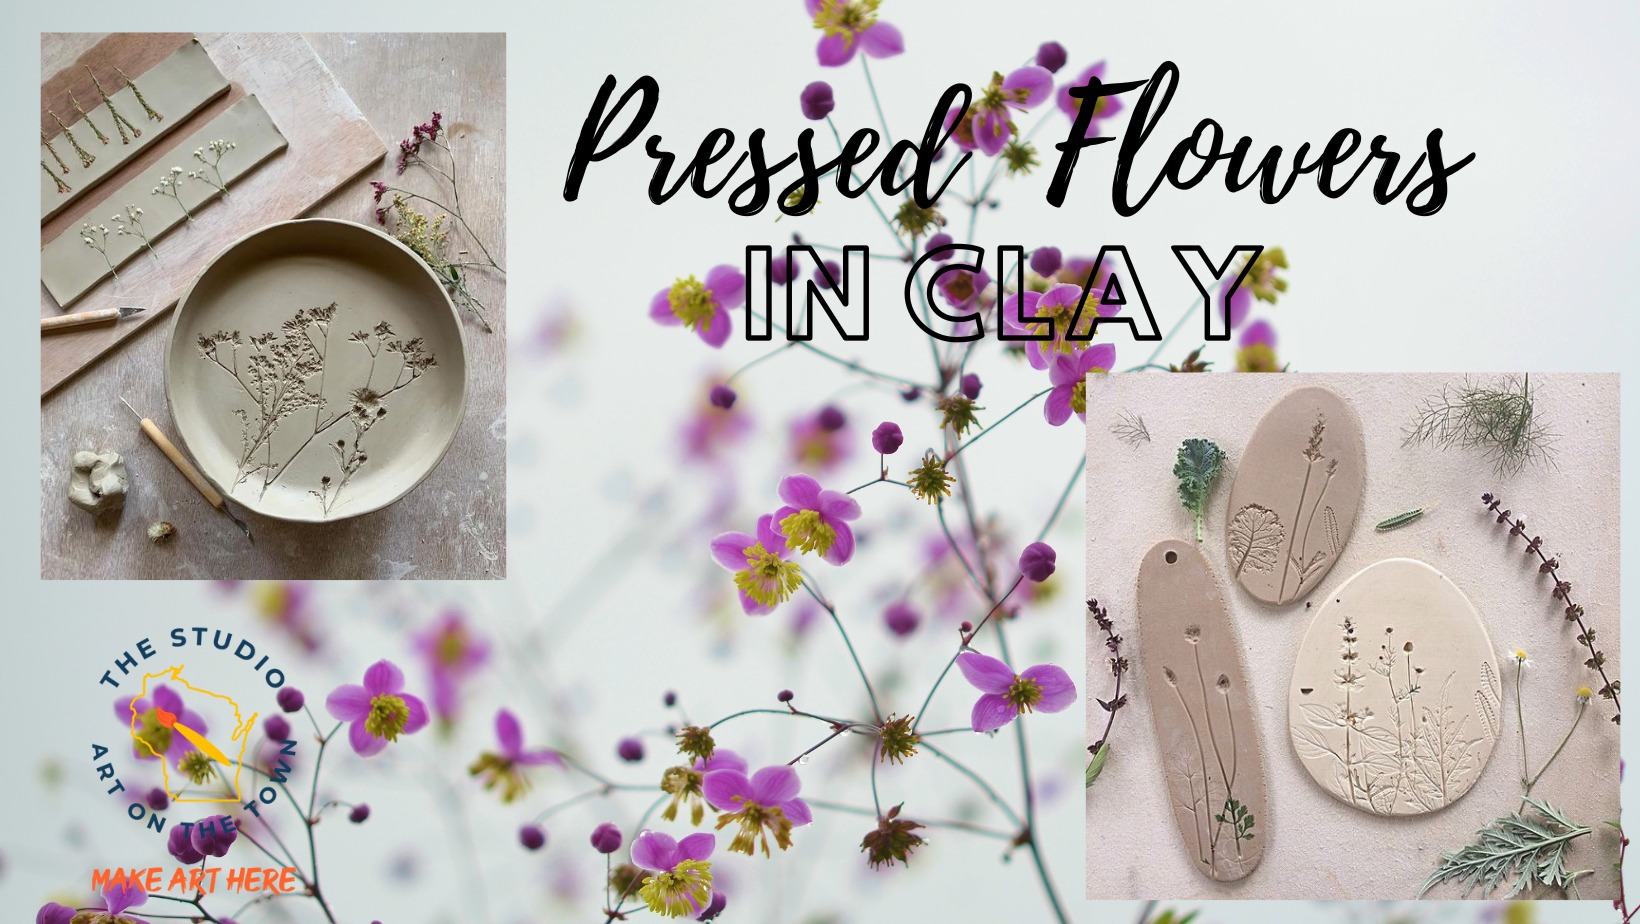 Pressed Flowers in Clay